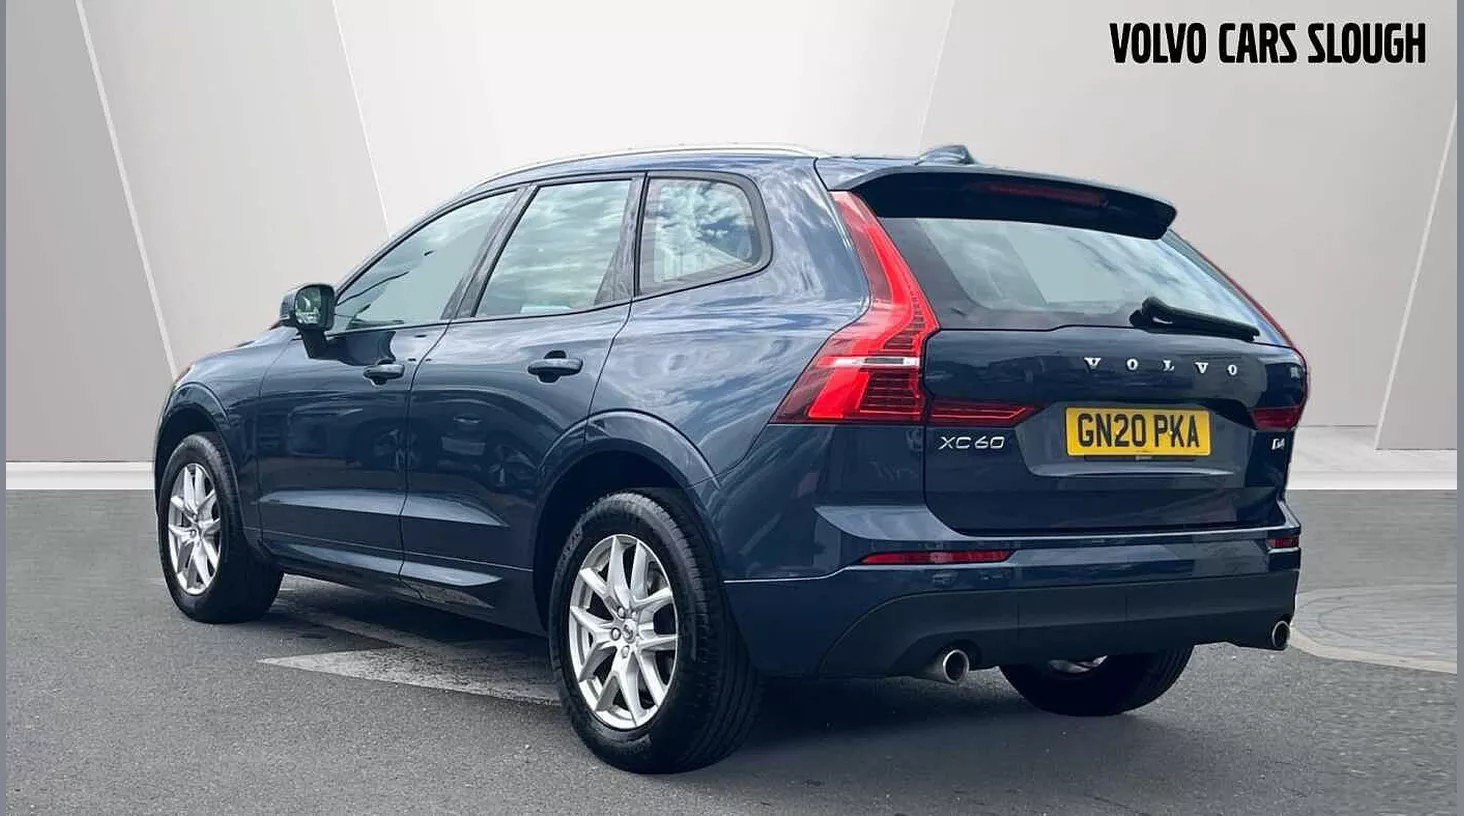 Volvo XC60 2.0 D4 Momentum 5dr Geartronic